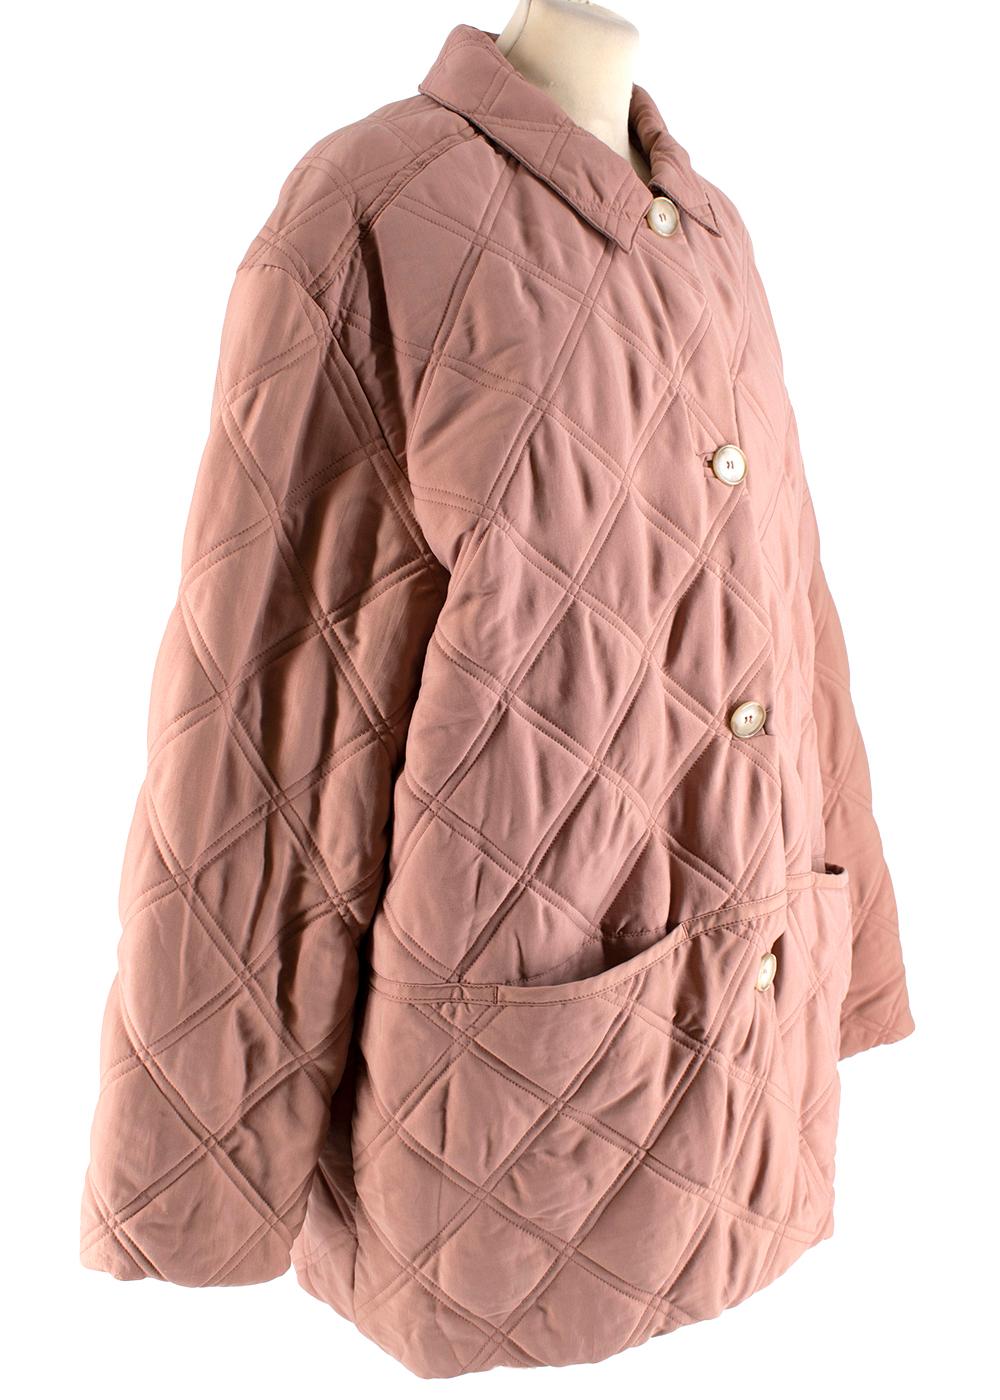 Becken Dusty Pink Oversized Quilted Paddock Jacket

- Dusty pink quilted paddock jacket 
- Oversized style 
- Large front button fastening 
- Pointed spread collar 
- Front patch pockets 
- Fully lined 

Materials: 
Main - 76% Cupro, 24%